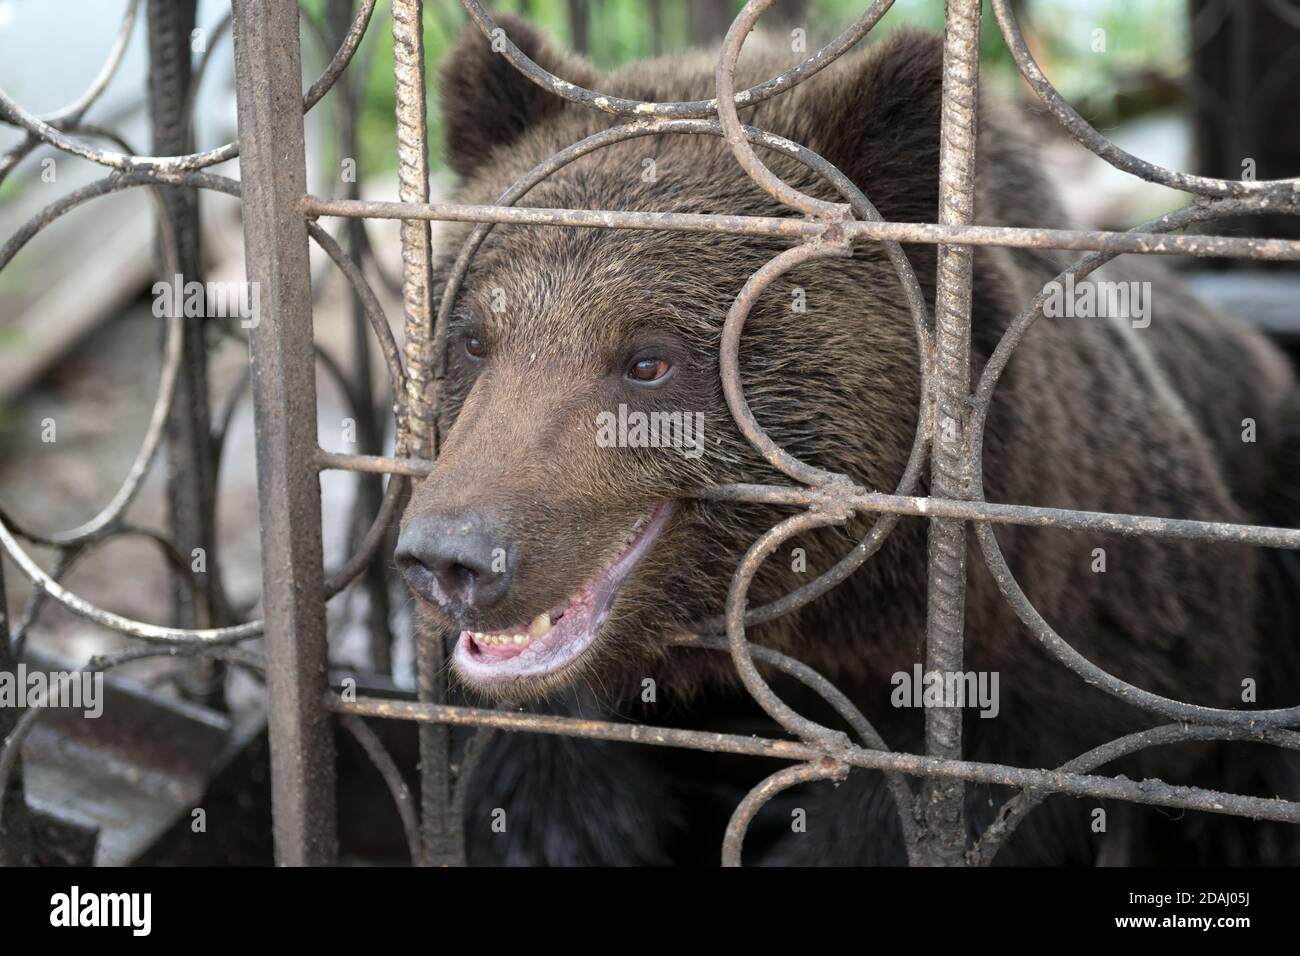 The bear gnaws metal cages of the cage. Stock Photo